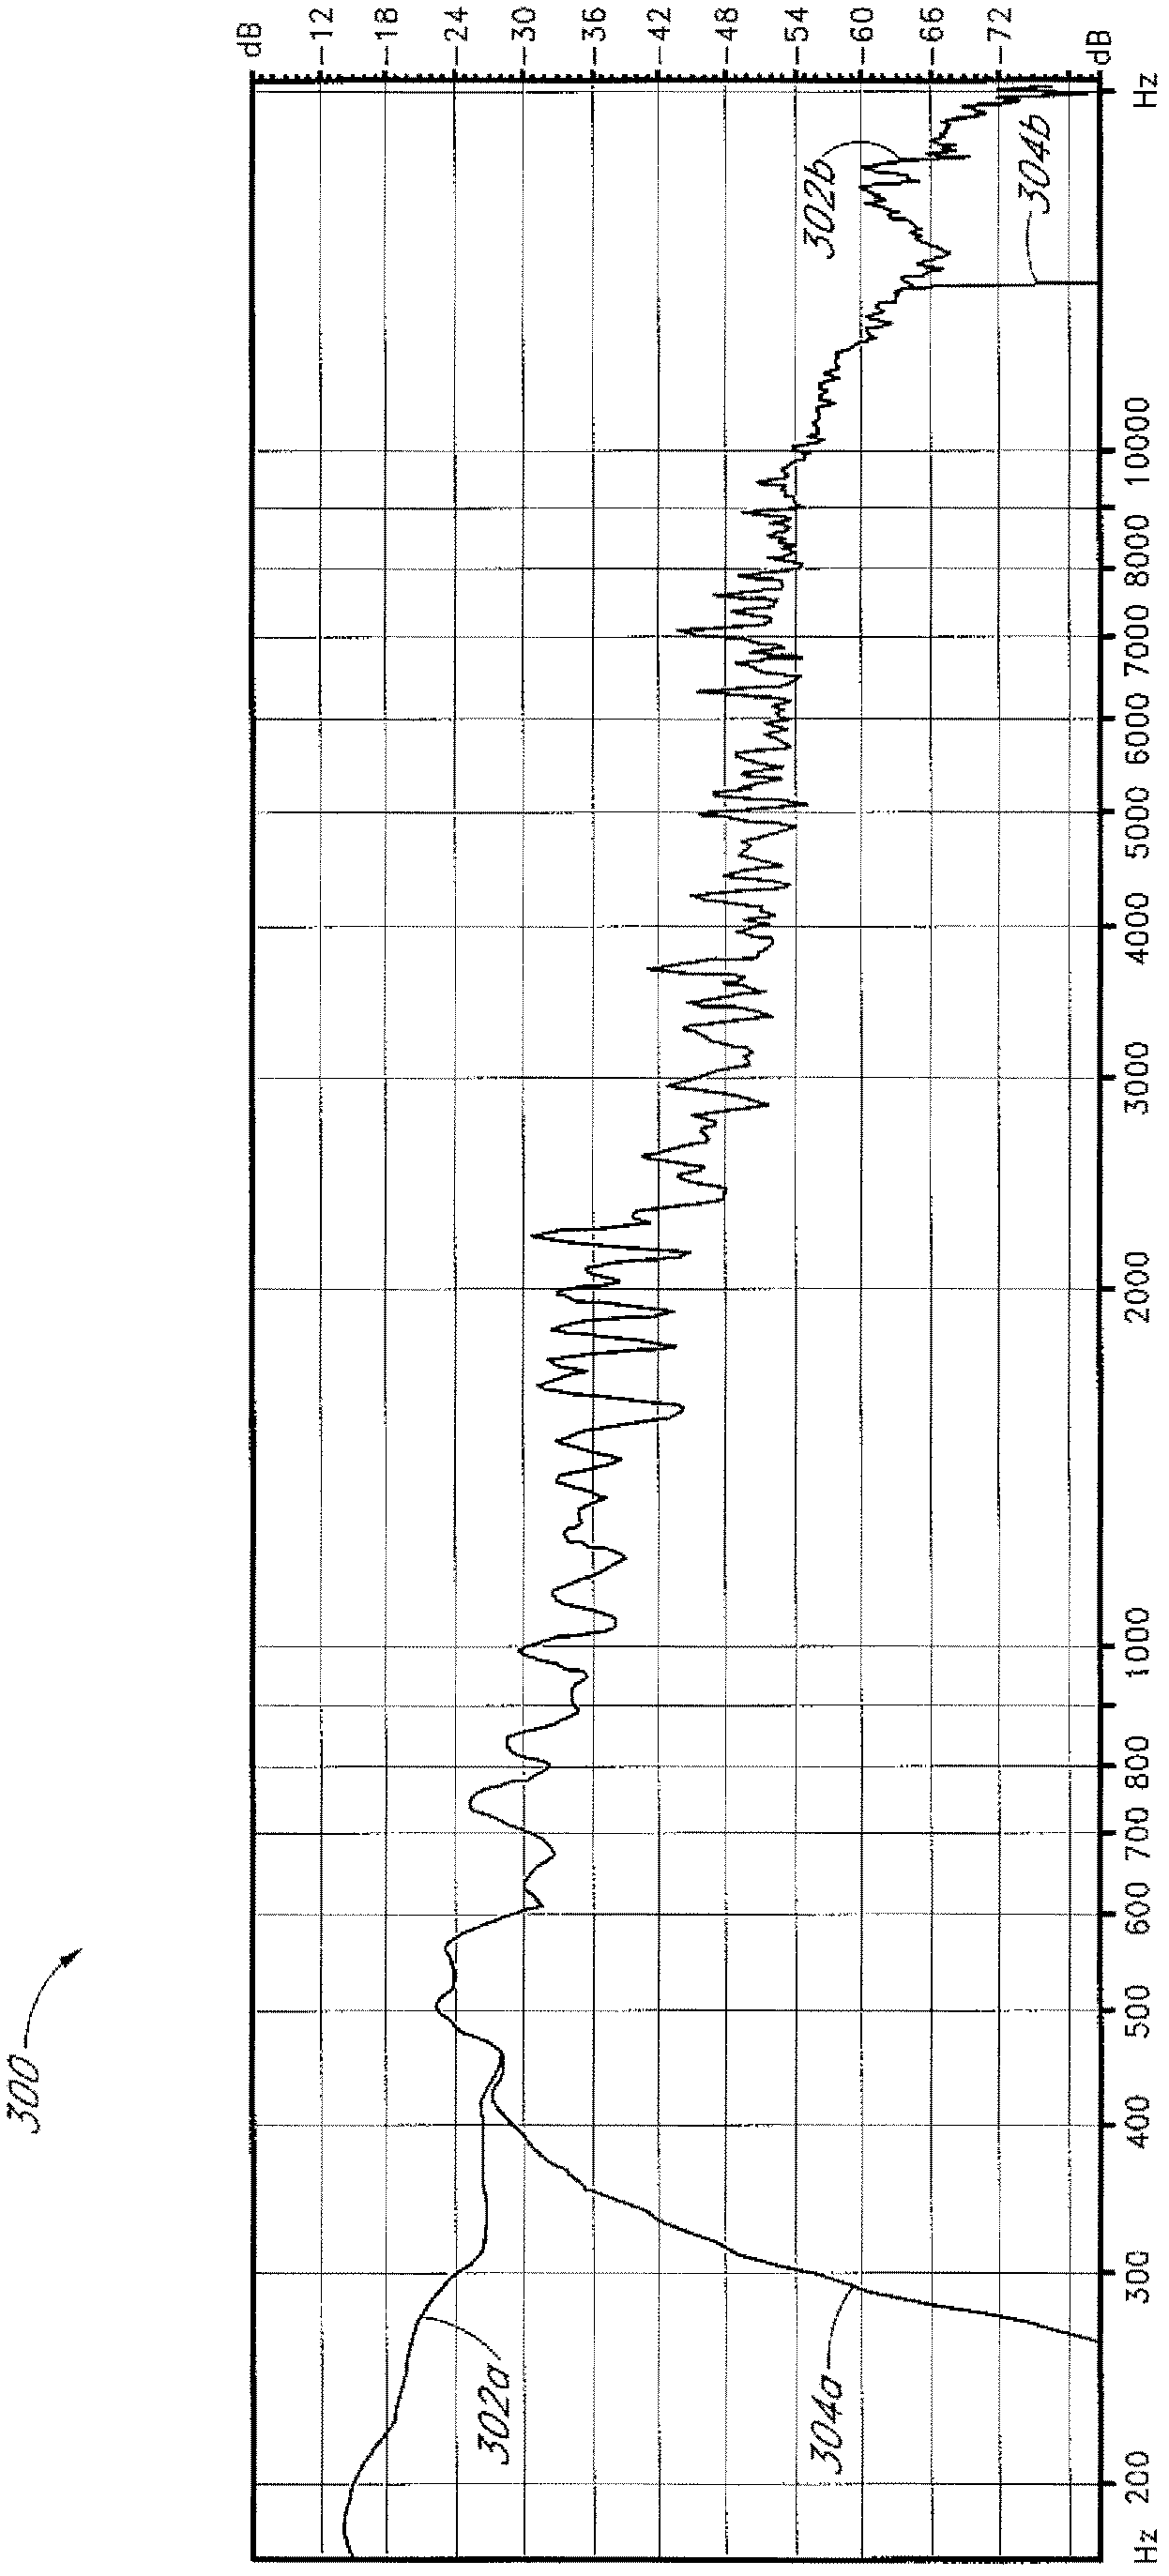 System for increasing perceived loudness of speakers